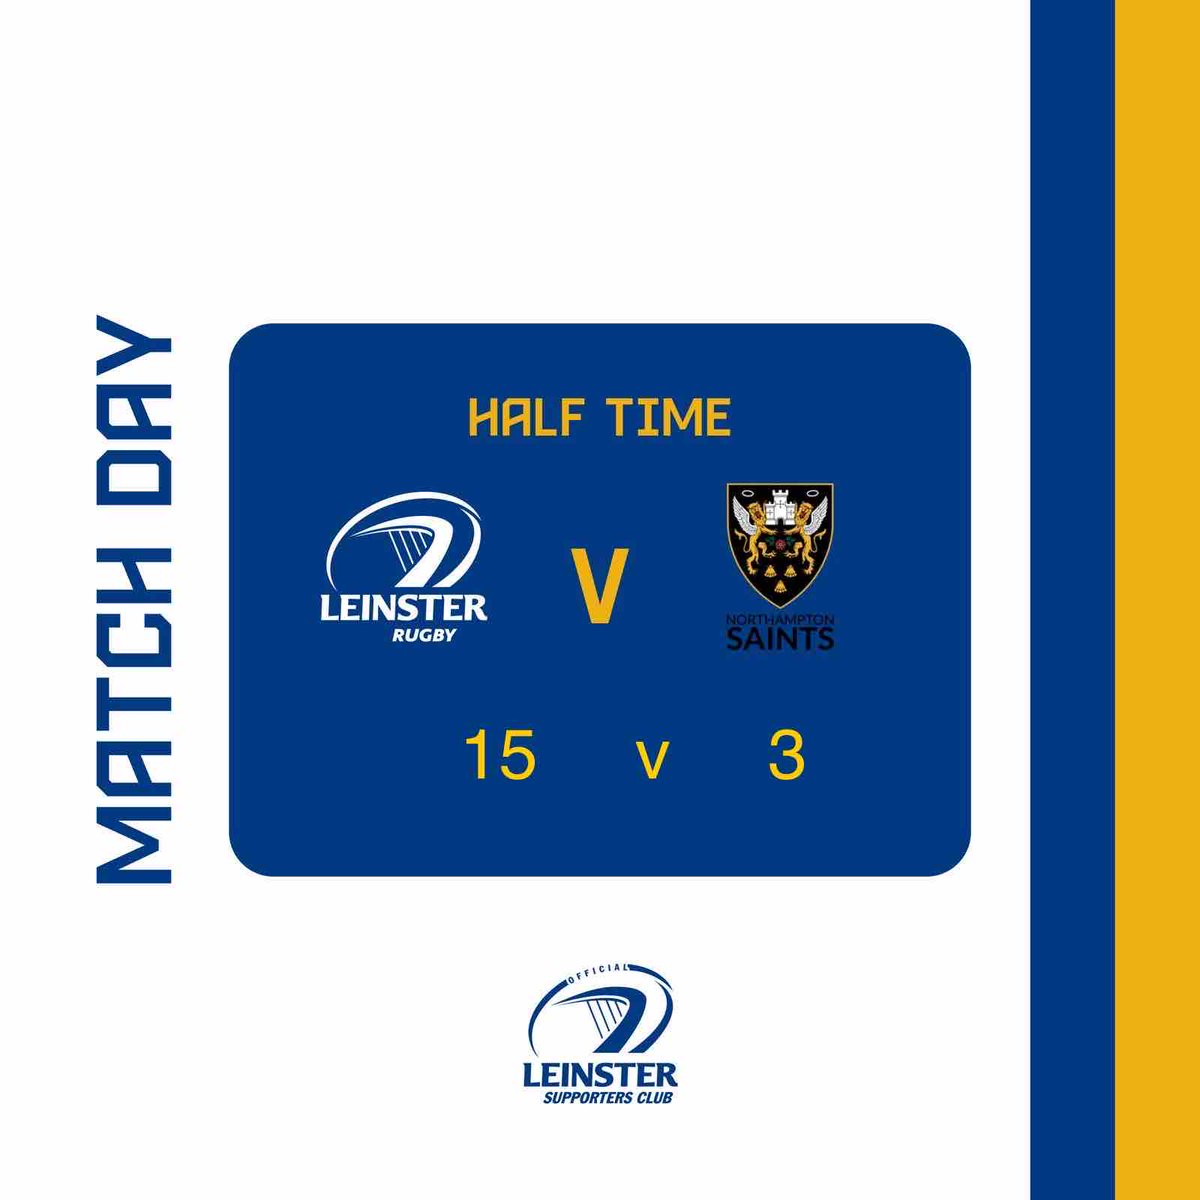 An enthralling 1st half here in Croke Park sees us take a 15-3 lead into the break. Massive 40’ to come